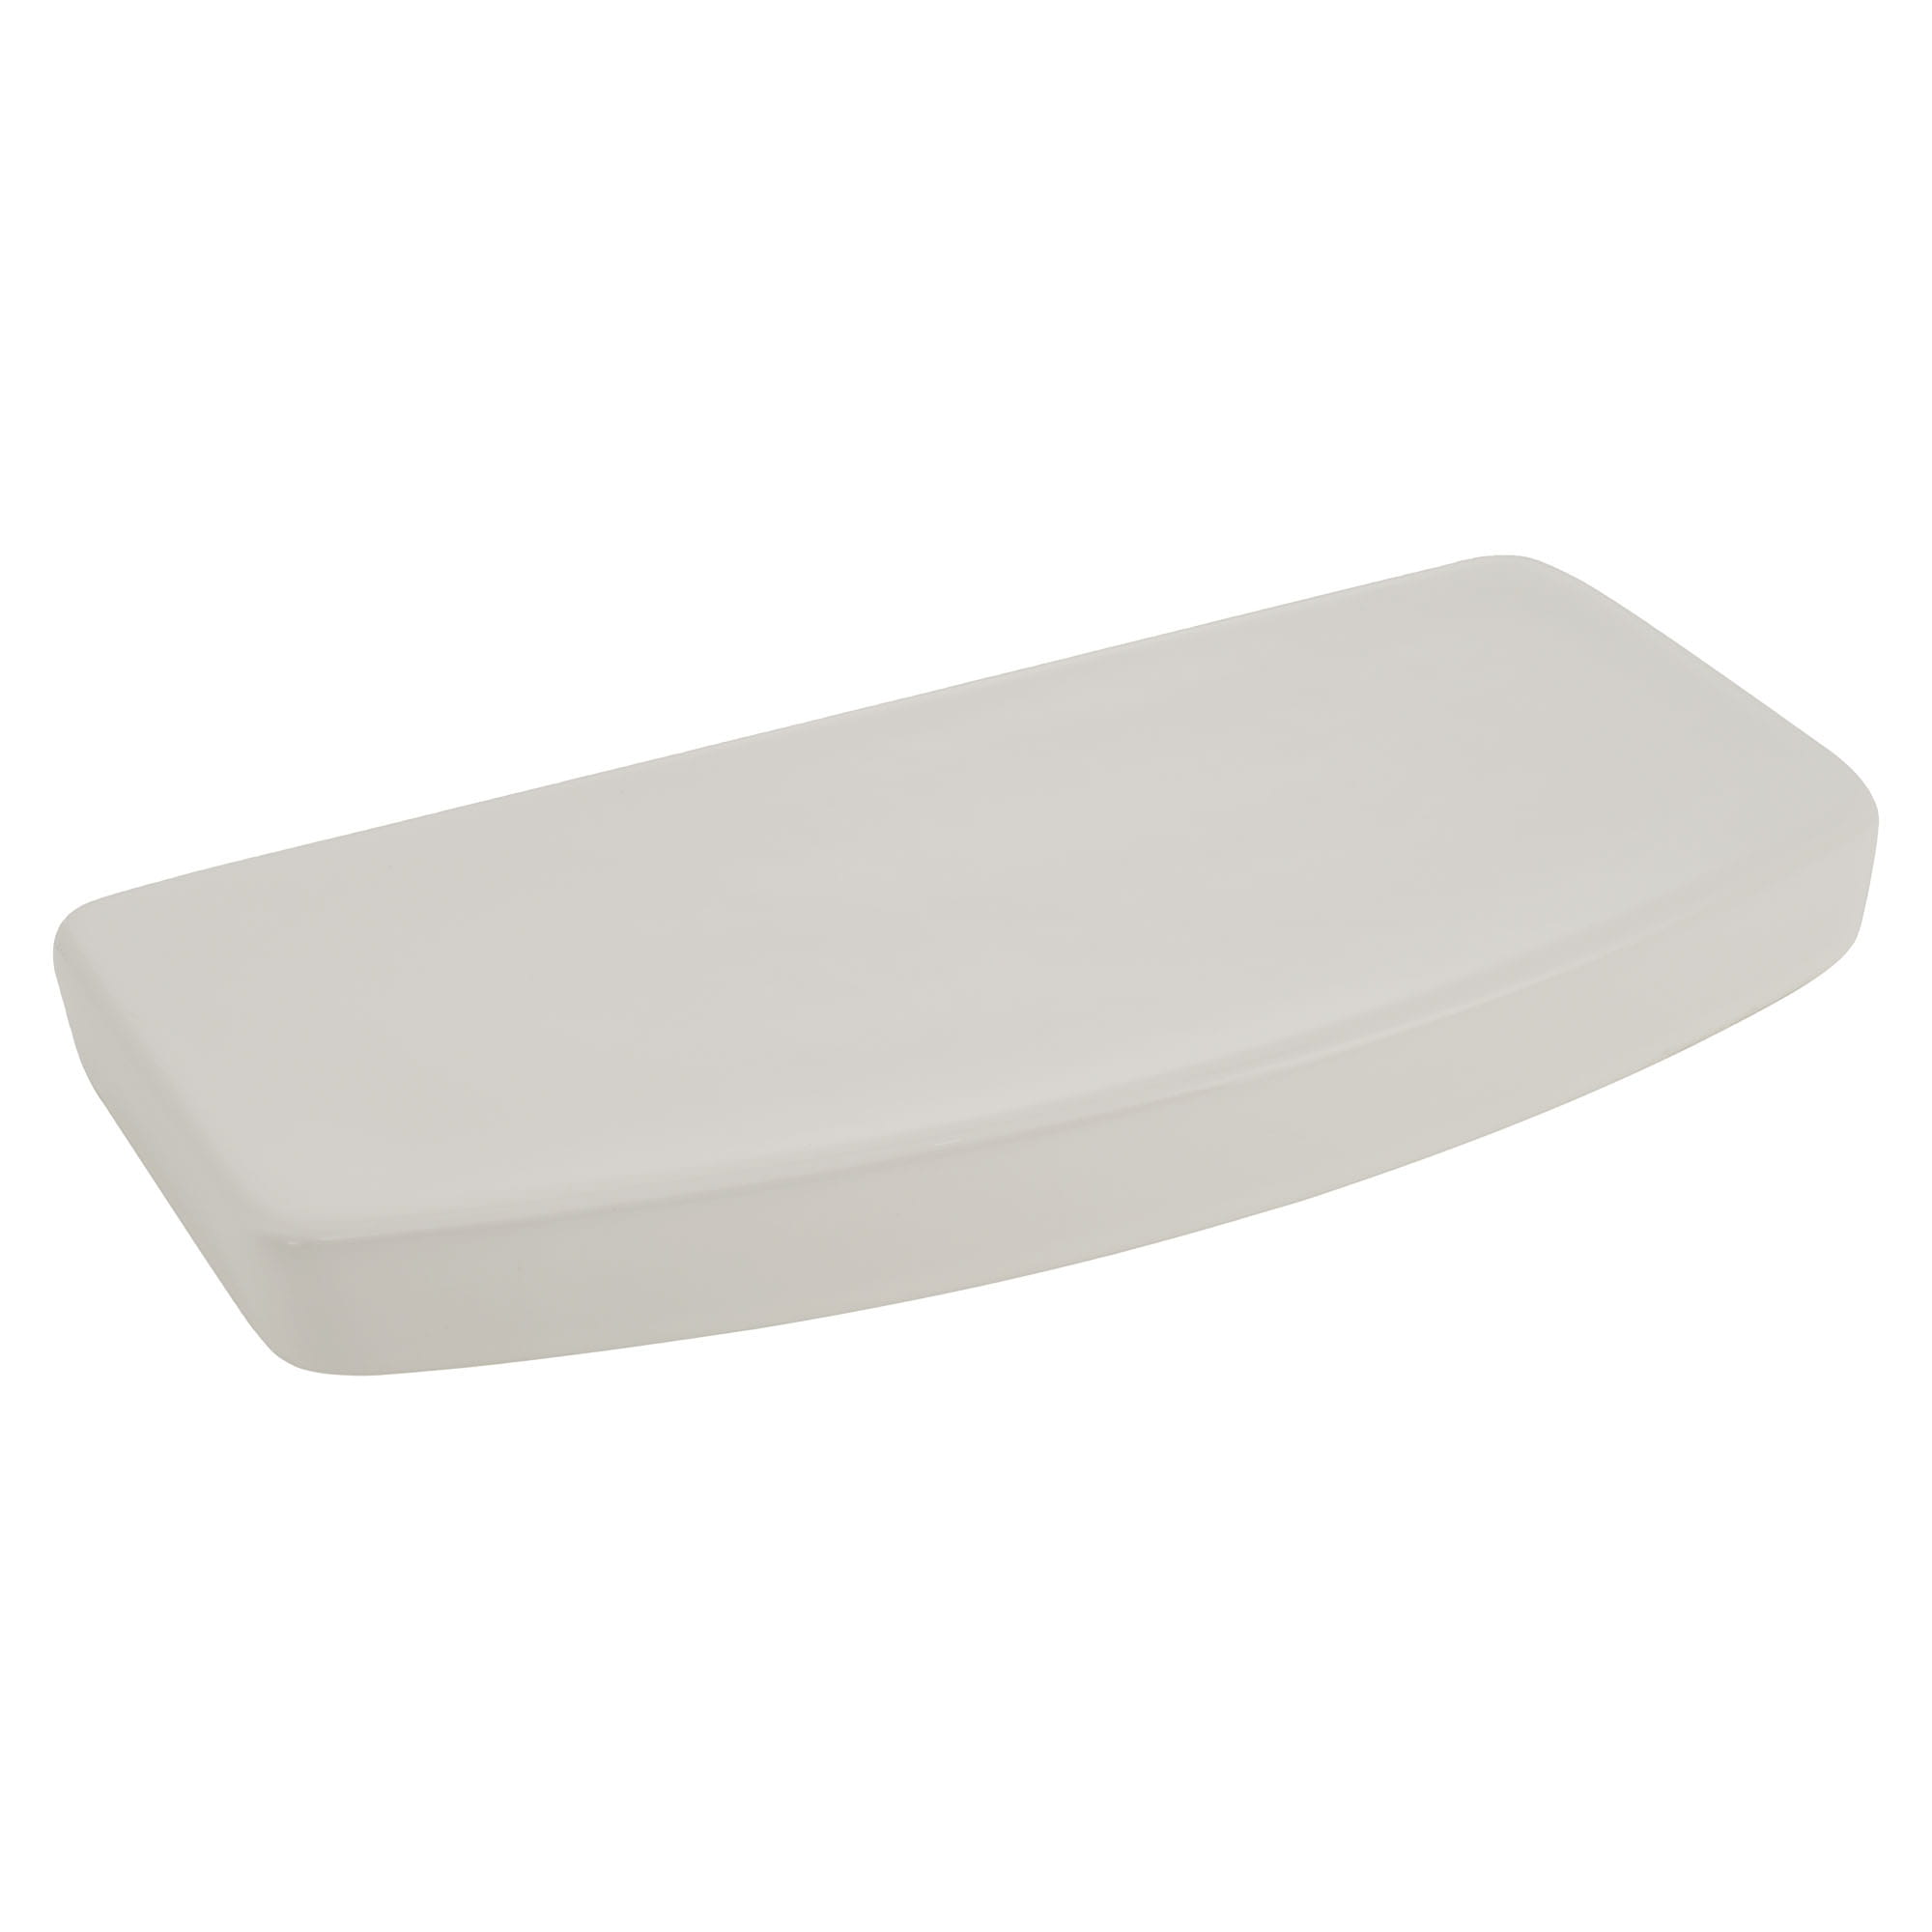 Townsend® VorMax® One-Piece Toilet Tank Cover